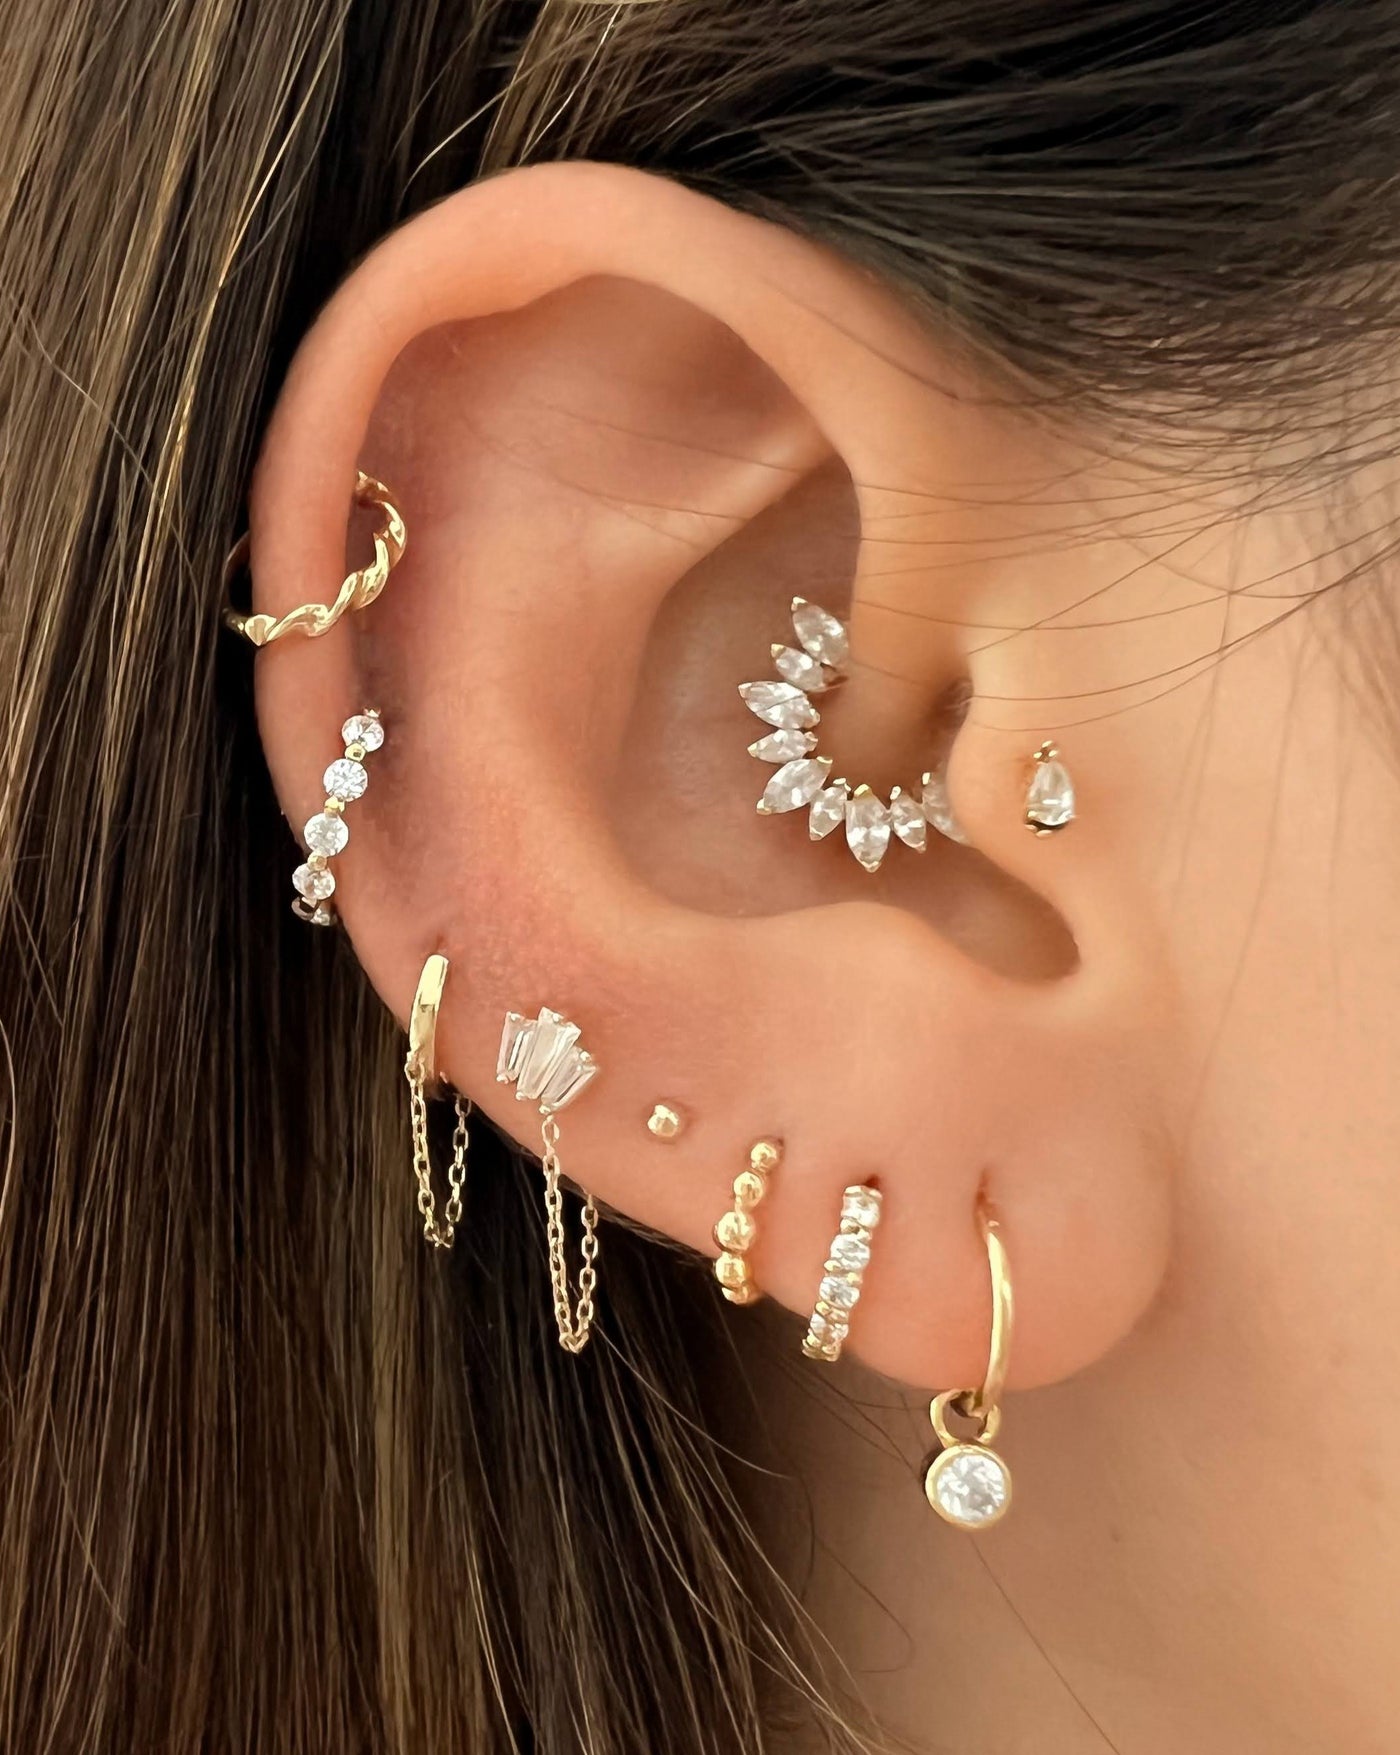 Tory - 18k Gold Spaced Crystals Conch Earring